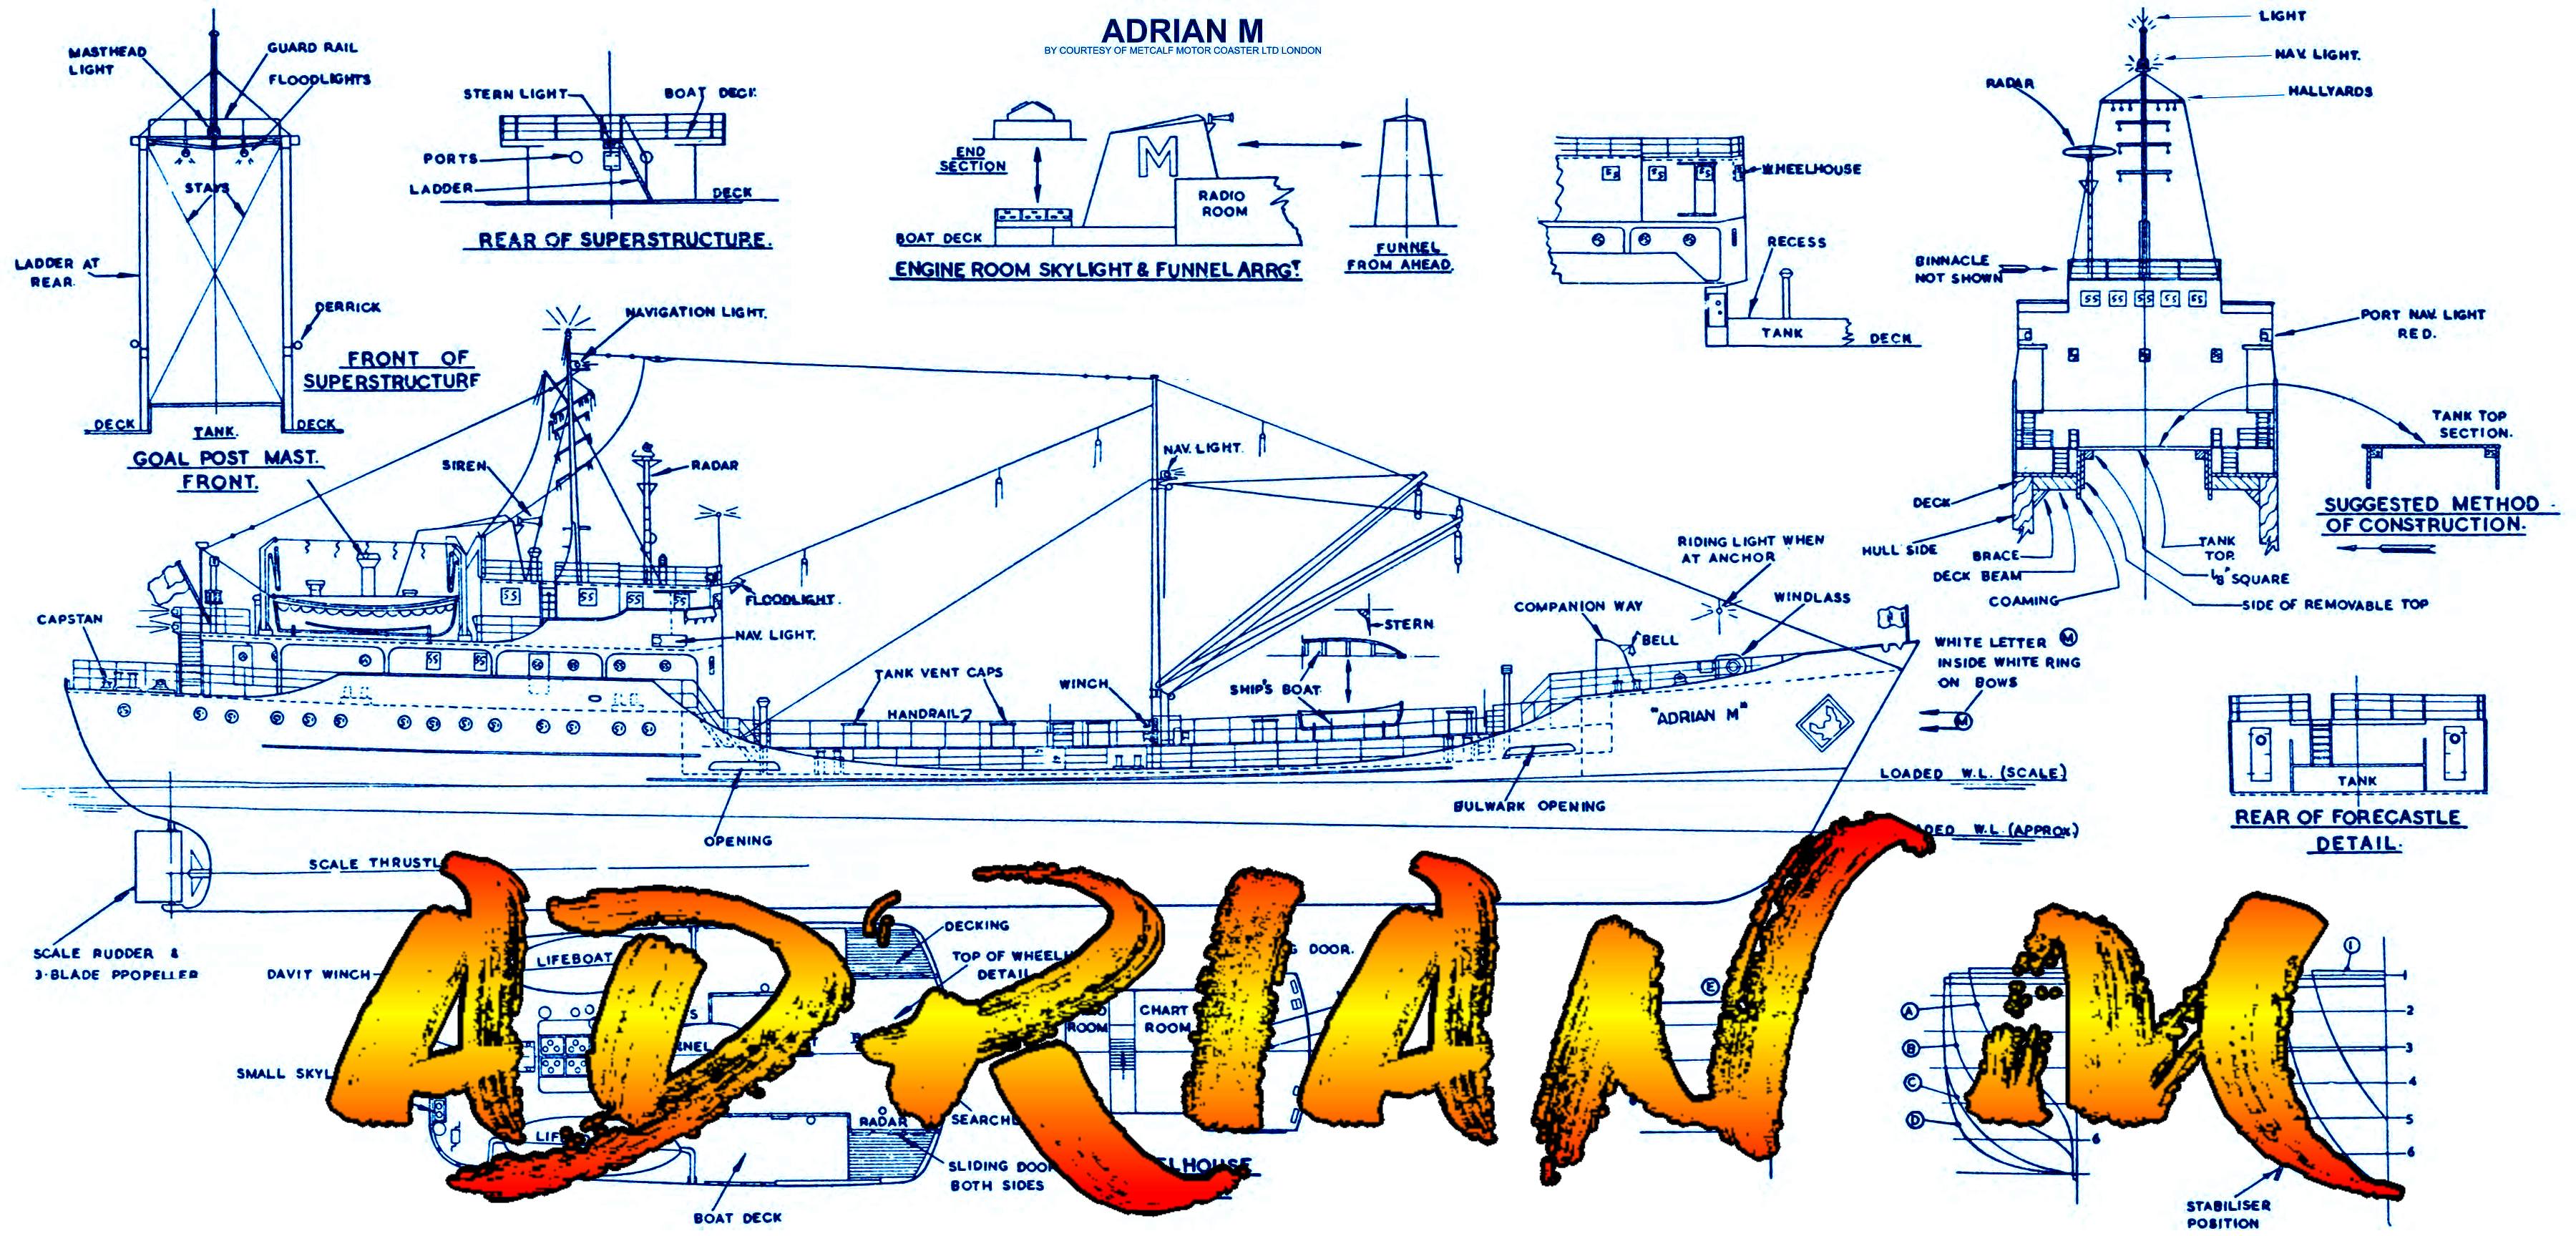 full size printed plan and article small coastal tanker 1:72 scale 36" adrian m suitable for radio control